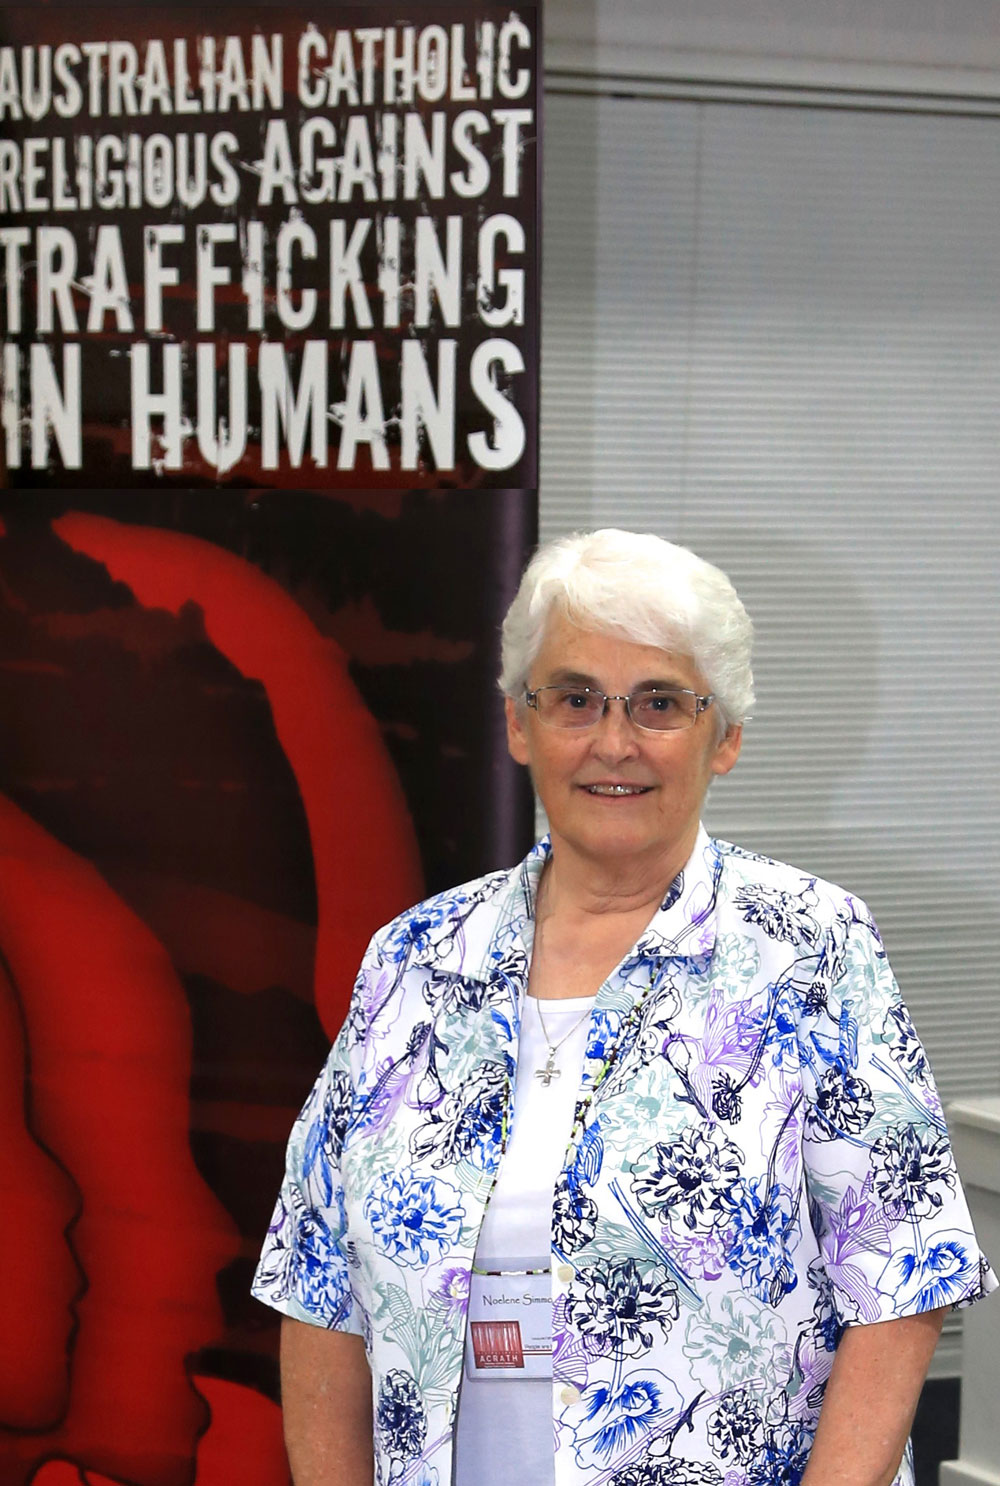 0219 JPICBLOG Noelene Simmons at launch of Catholic Social Justice Paper on Human Trafficking crp